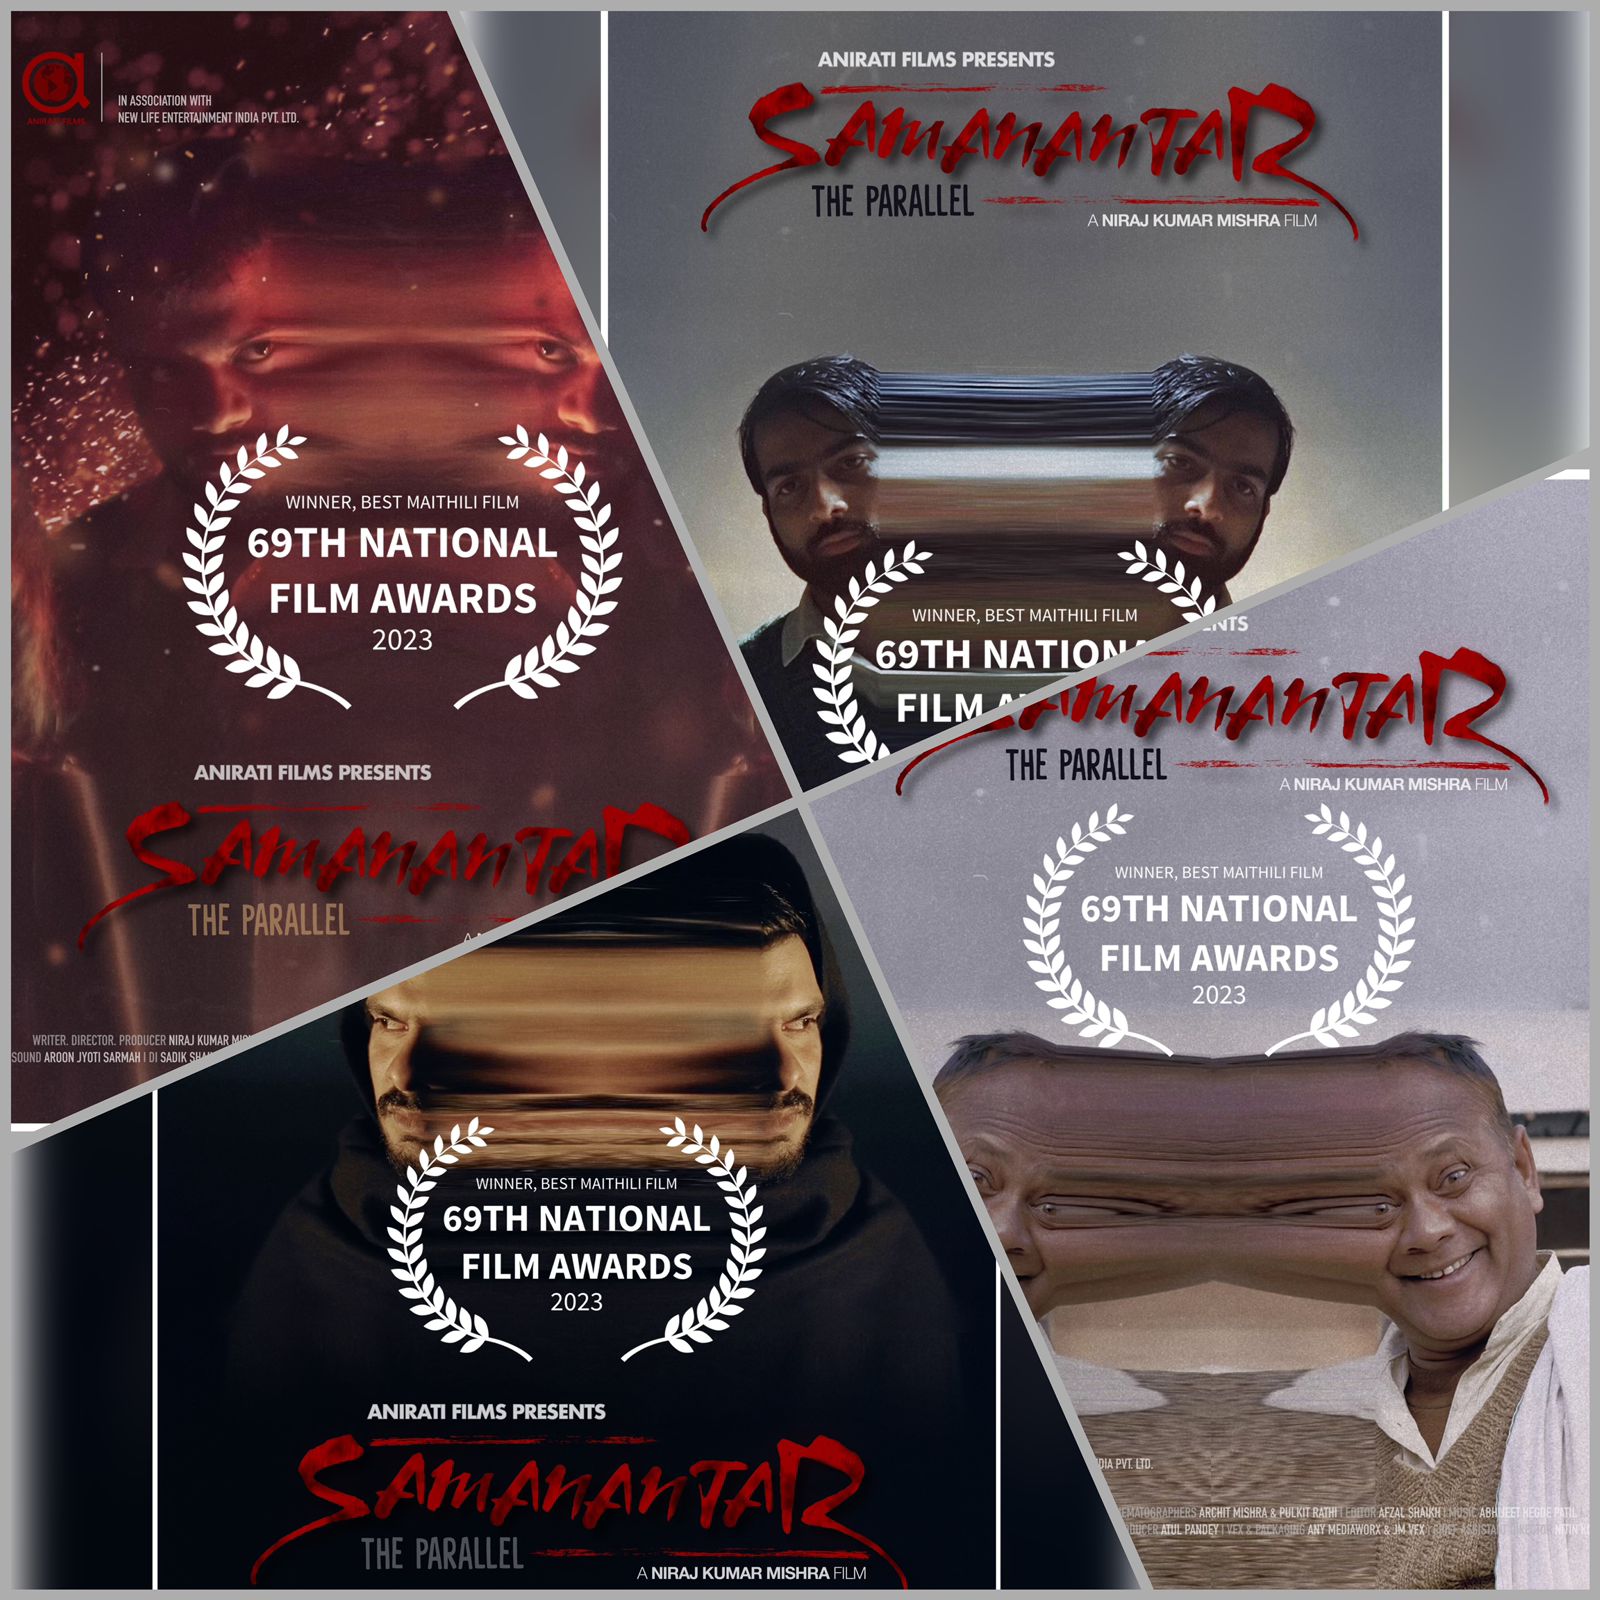 The feature film ‘SAMANANTAR’ (The Parallel), won the ‘Best Feature Film’ at the 69th National Film Awards.